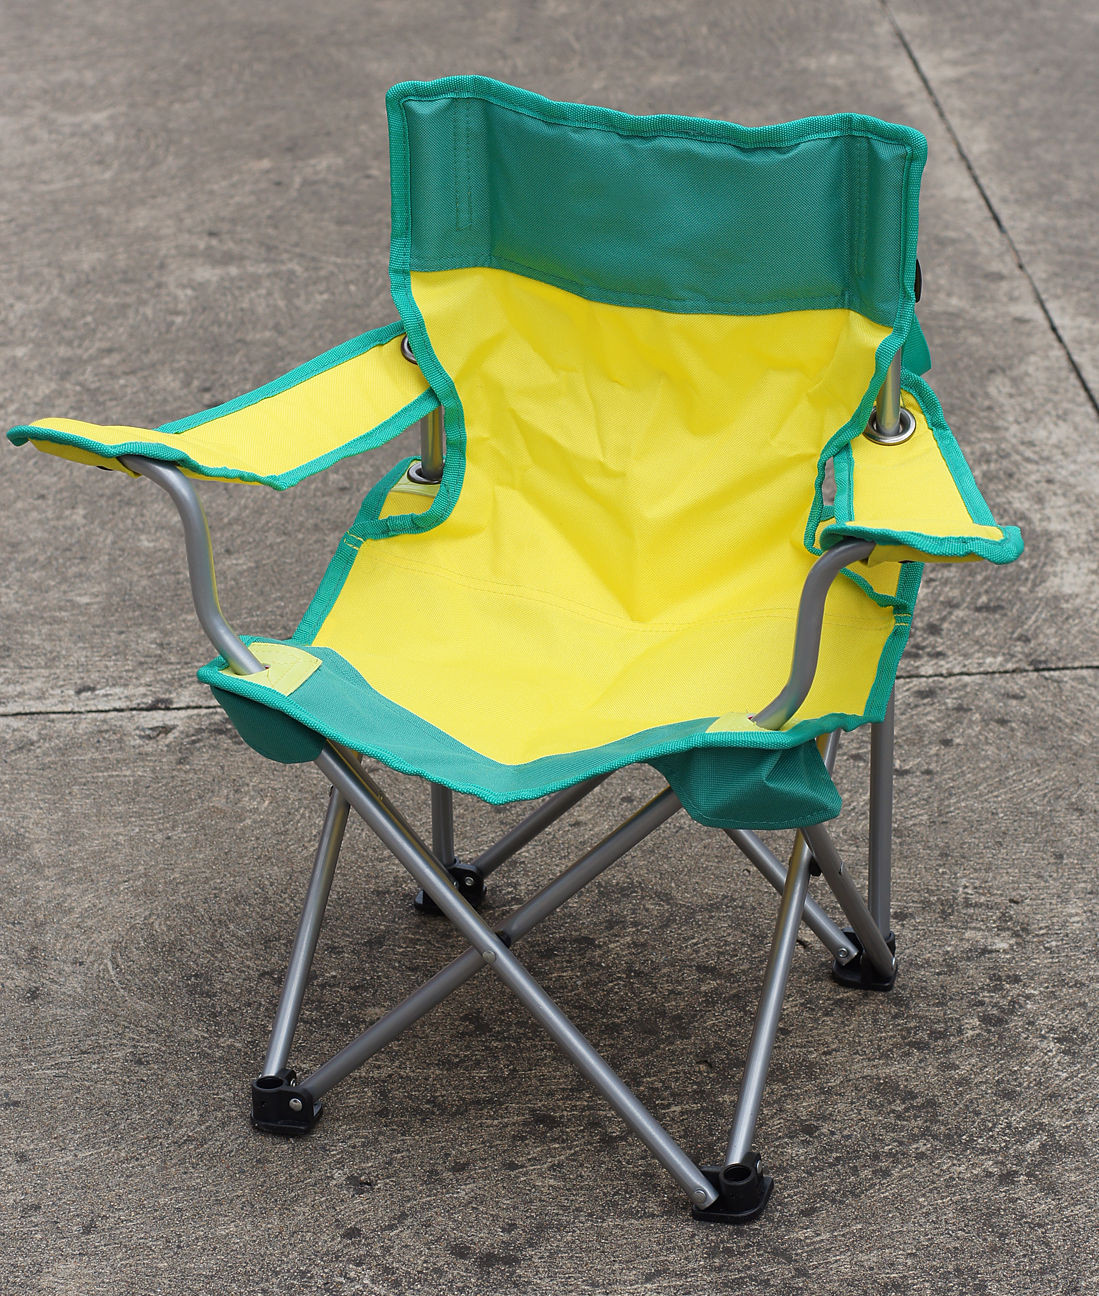 Kids Folding Camp Chair
 Kids Folding Chair With Arms Foldable Light Outdoor